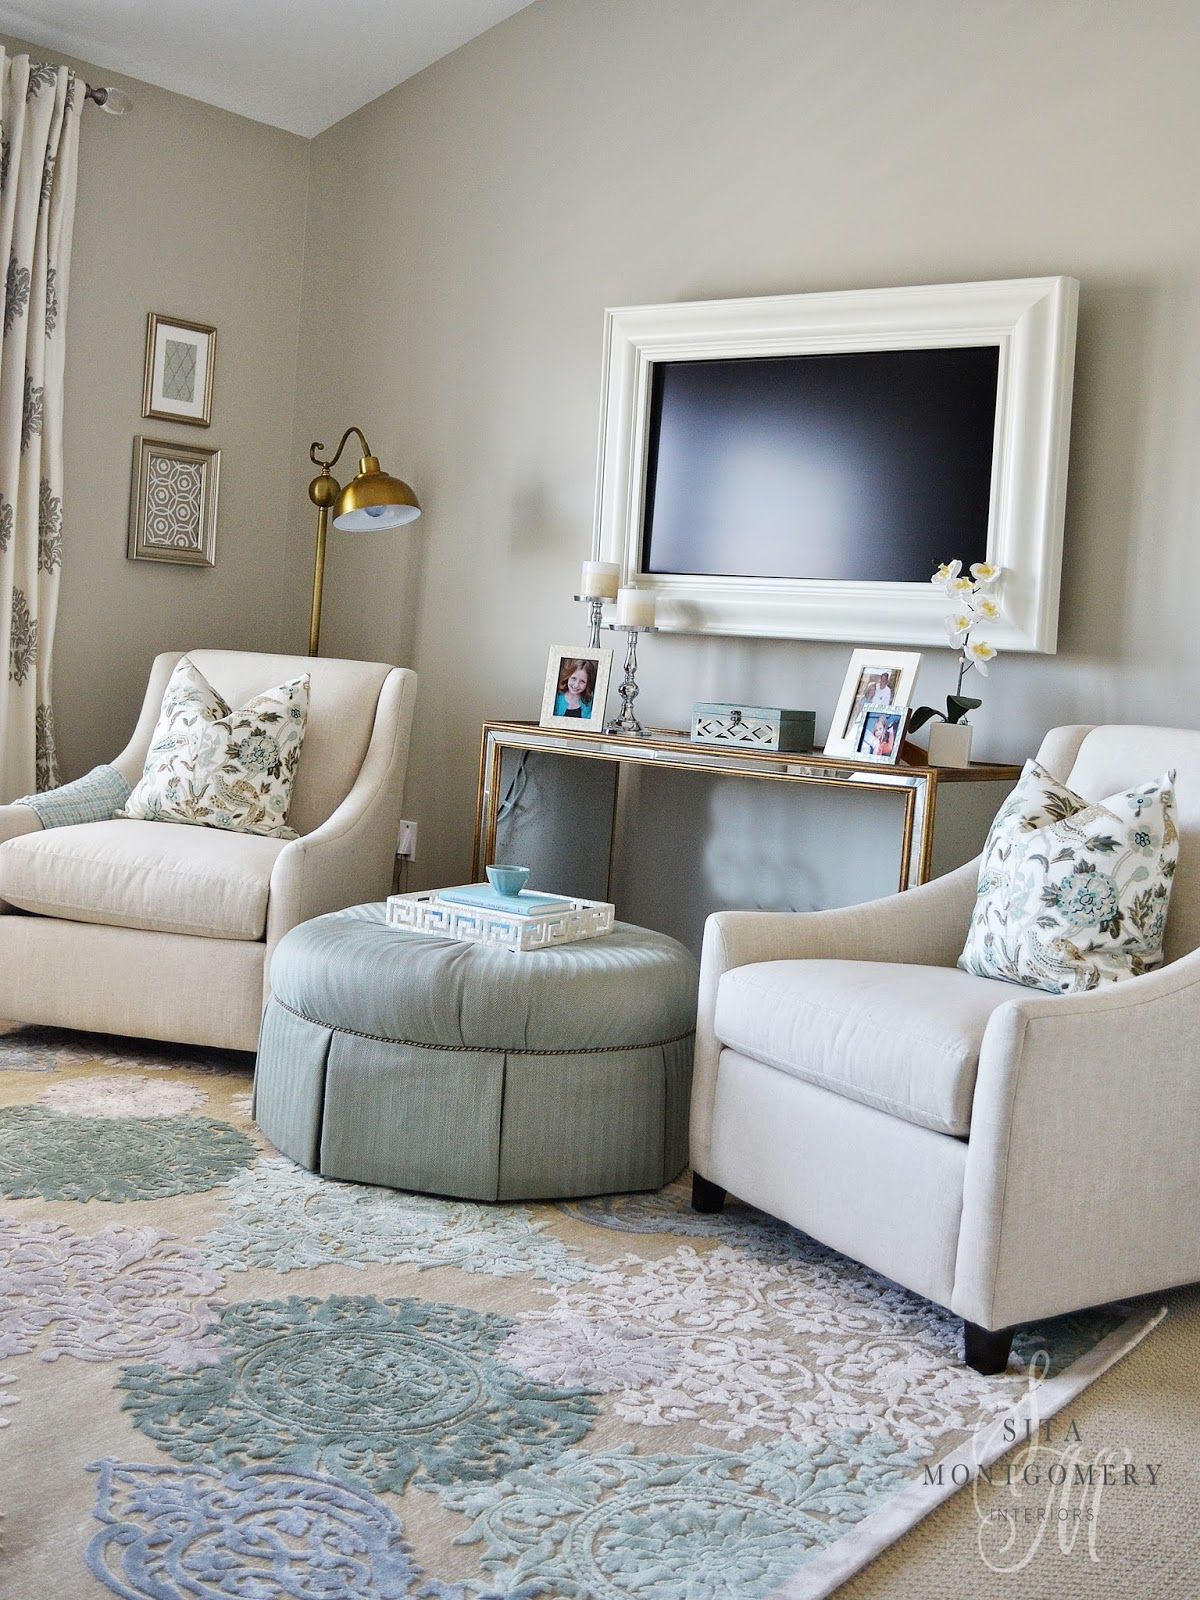 Love this sitting area in a master bedroom! | Sita Montgomery ...